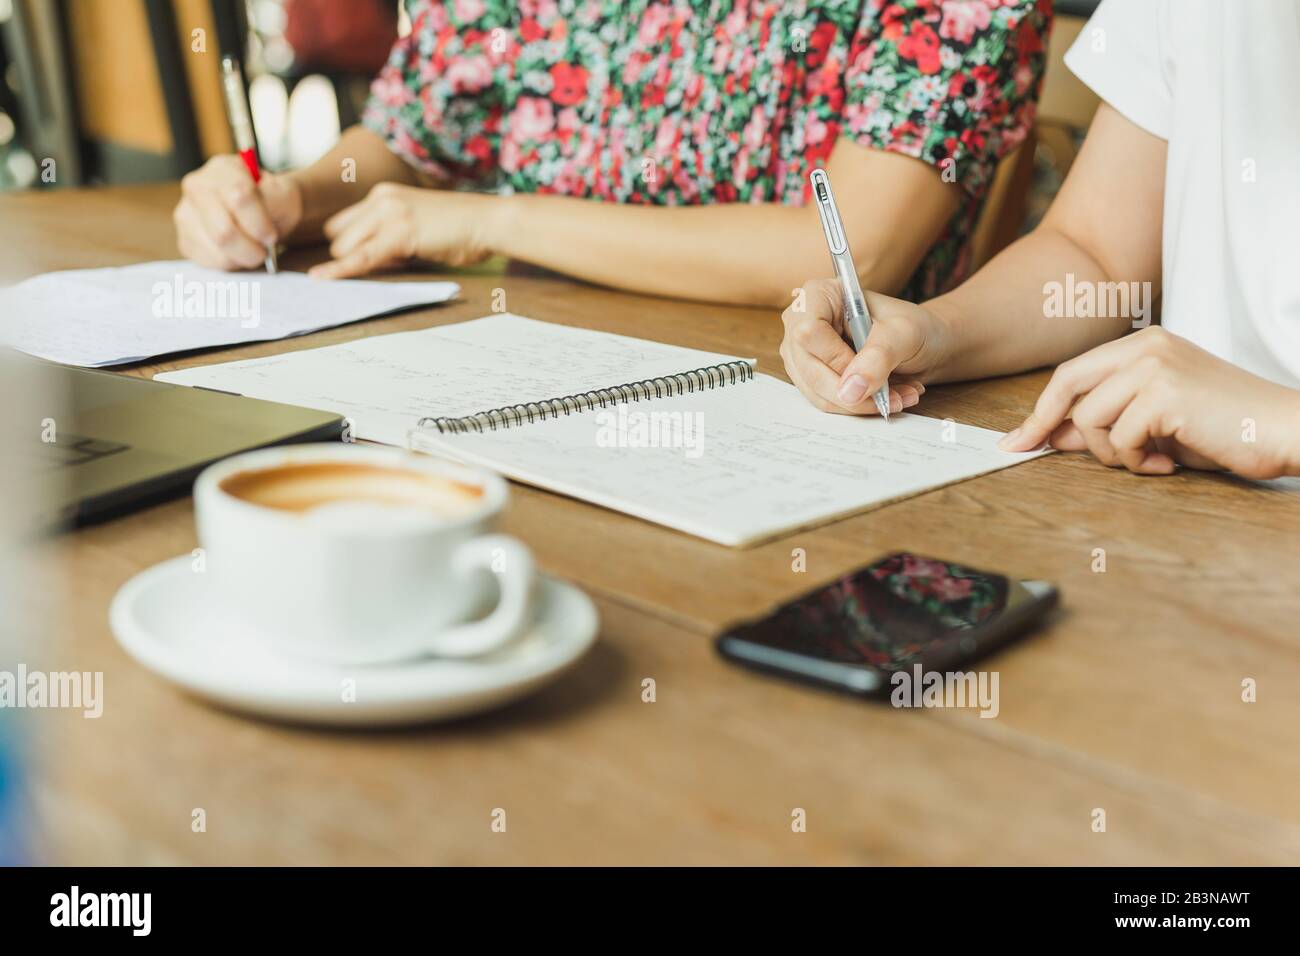 Business woman hands writing on notebook documents. Stock Photo